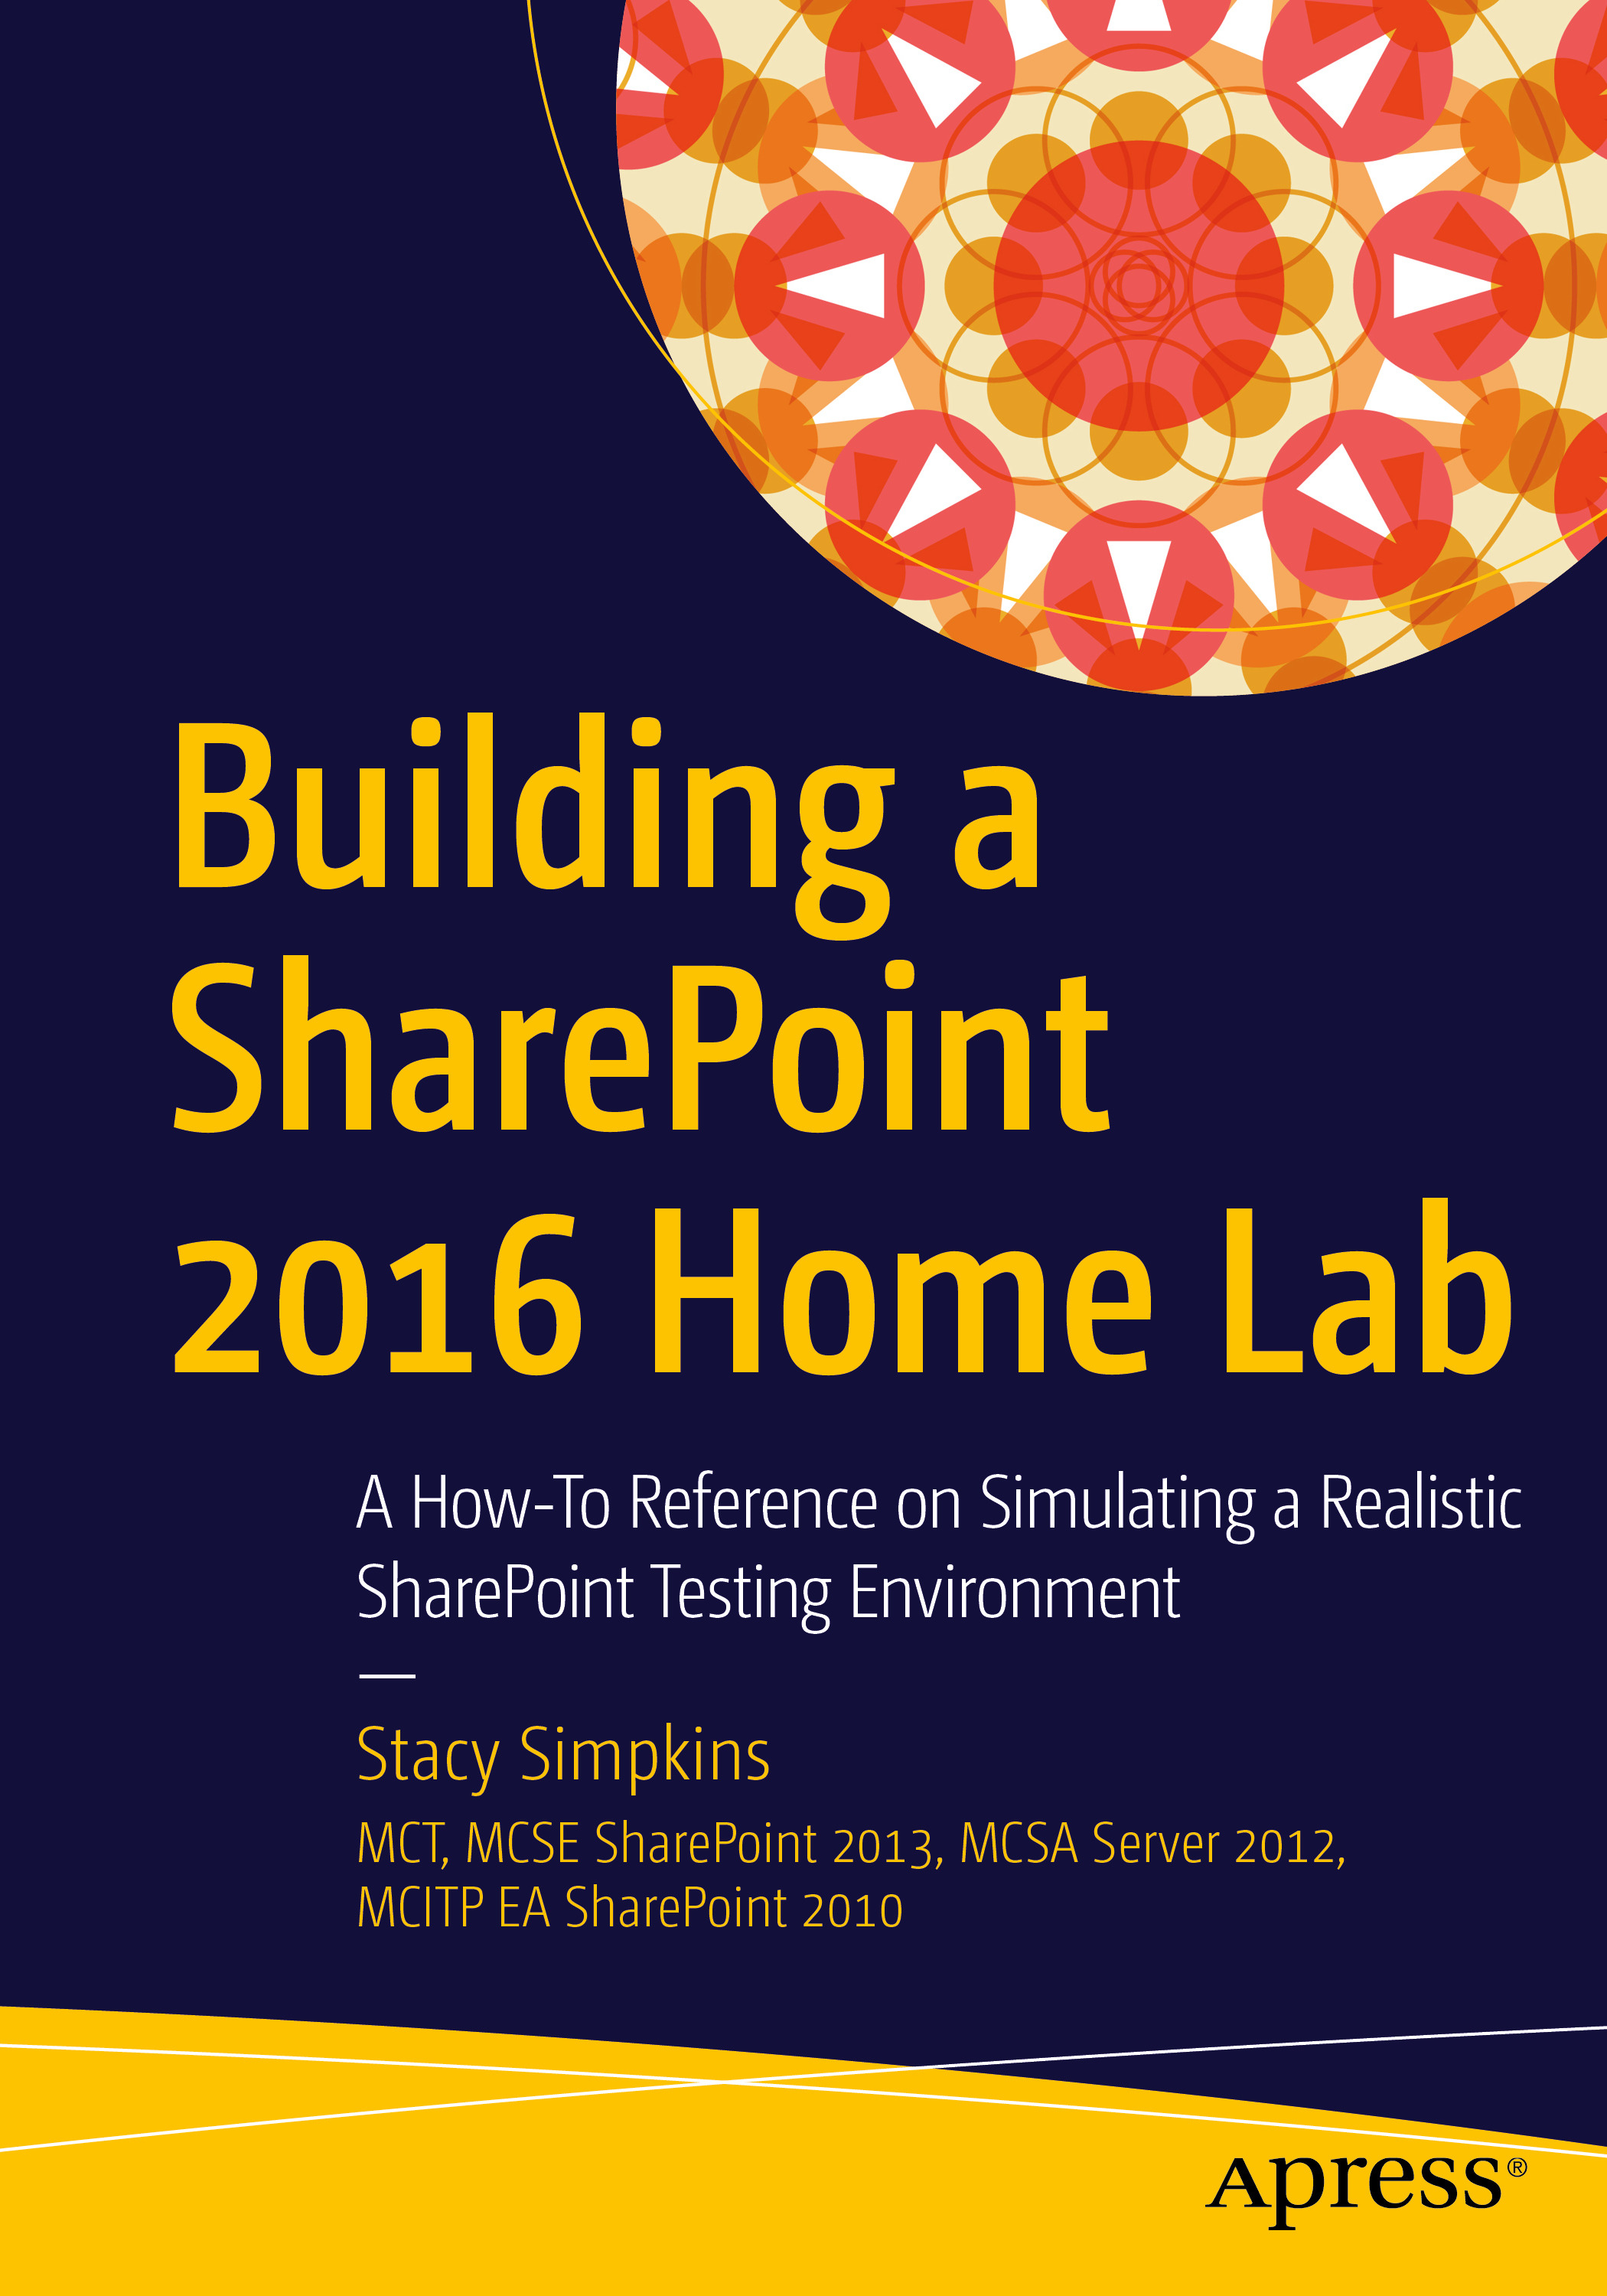 Introduction to Building a SharePoint 2016 Home Lab